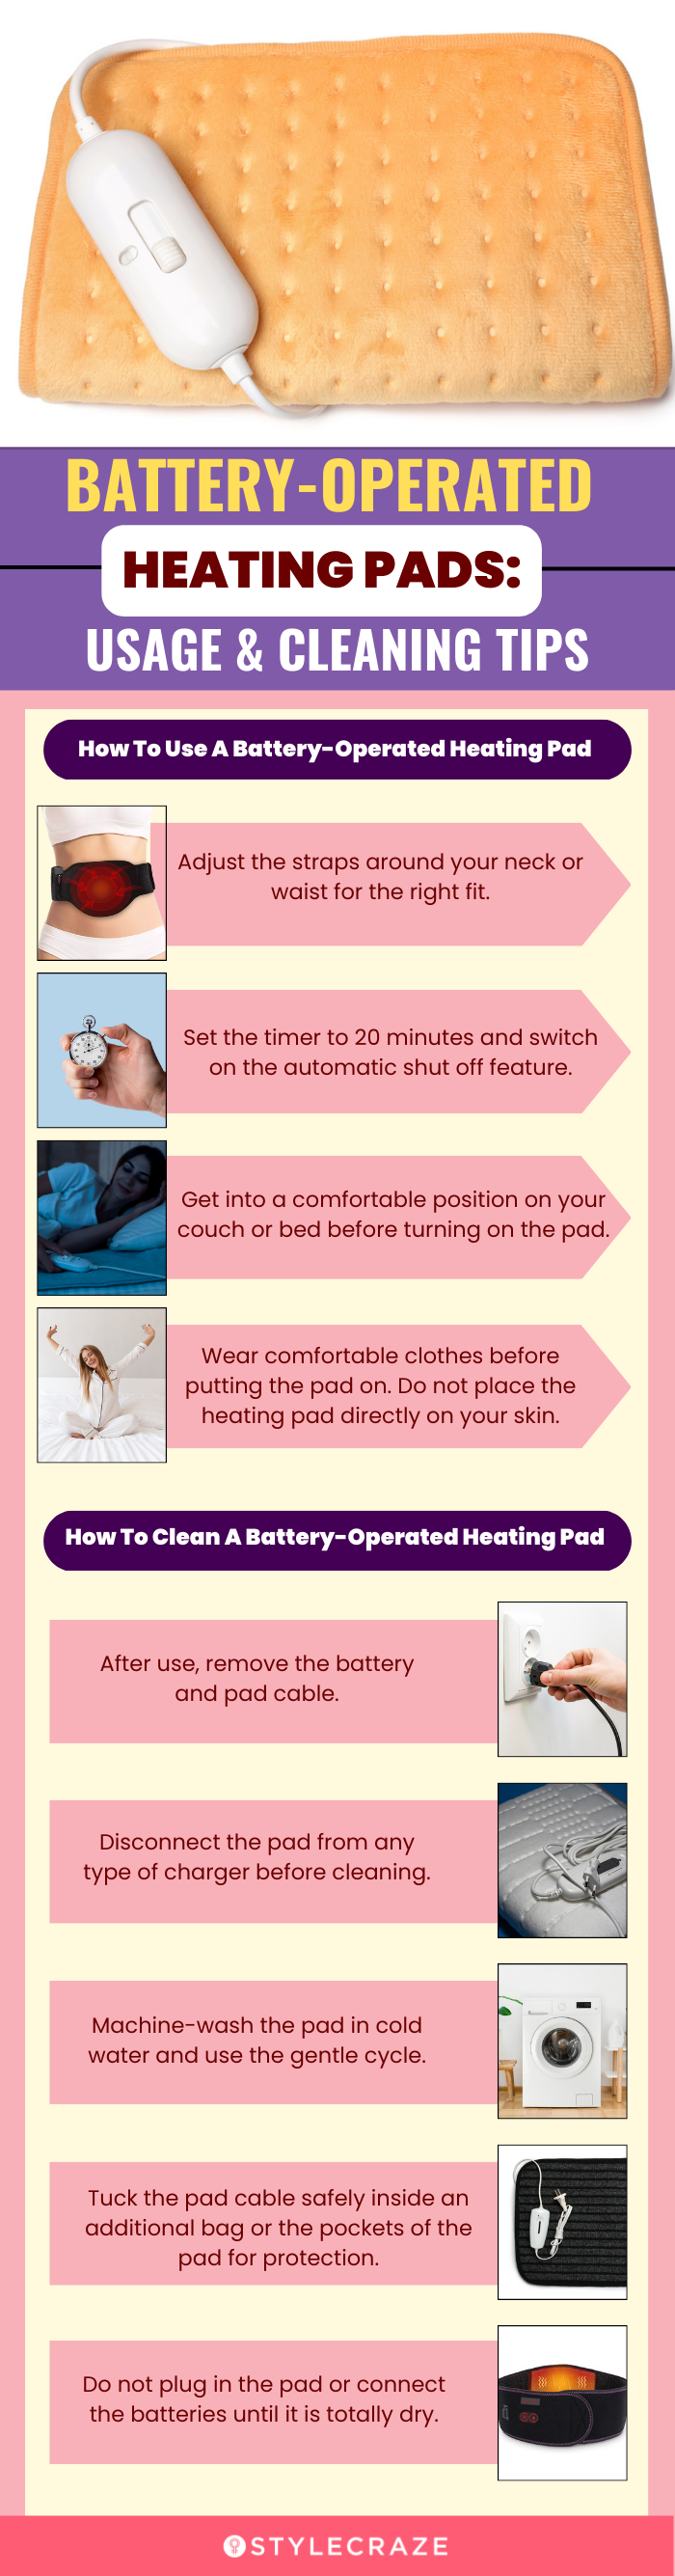 Battery-Operated Heating Pads: Usage & Cleaning Tips (infographic)